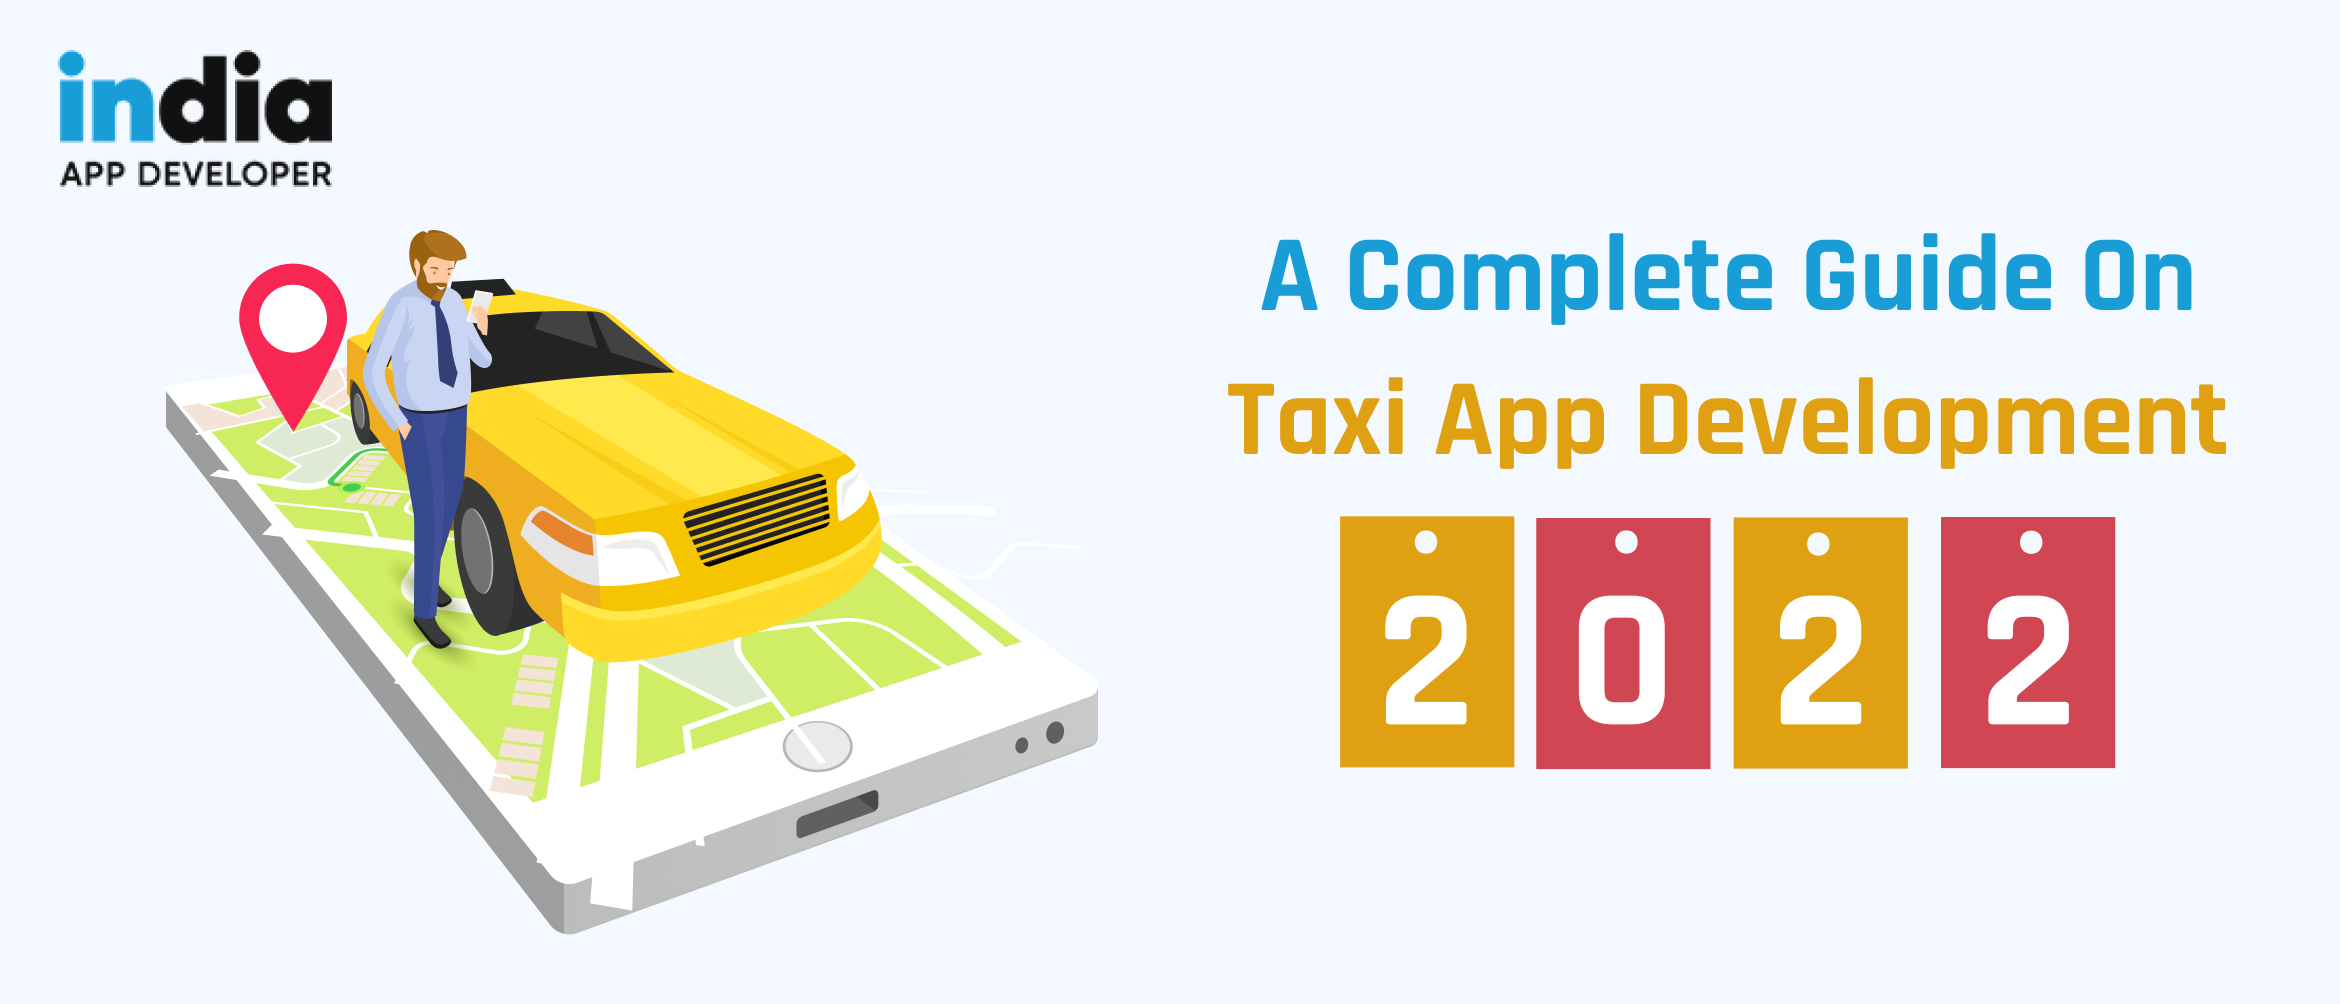 A complete guide on Taxi App development-2022